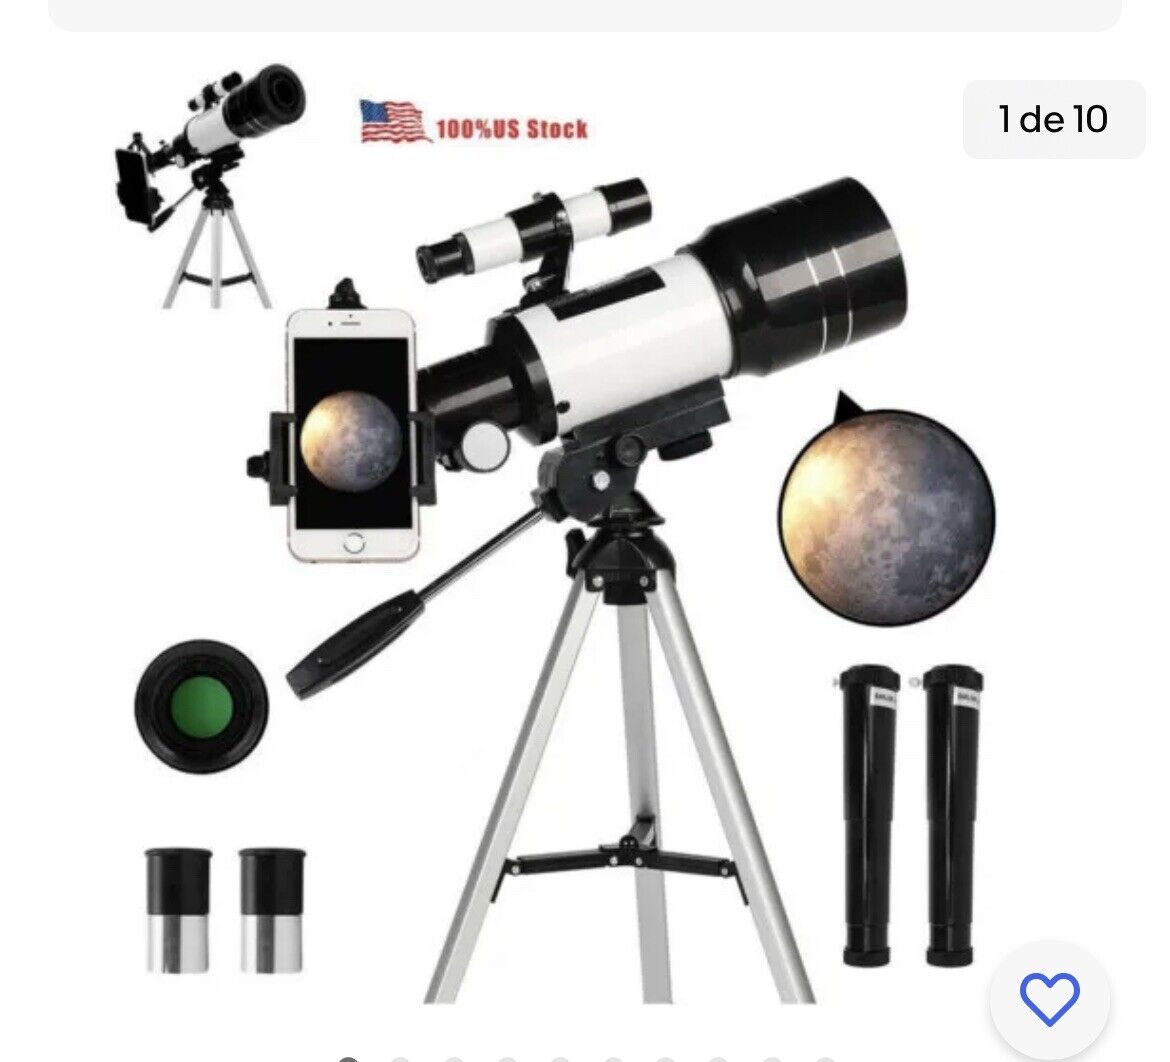 300/70mm Beginner Astronomical Telescope Night Vision For HD Viewing Space Moon